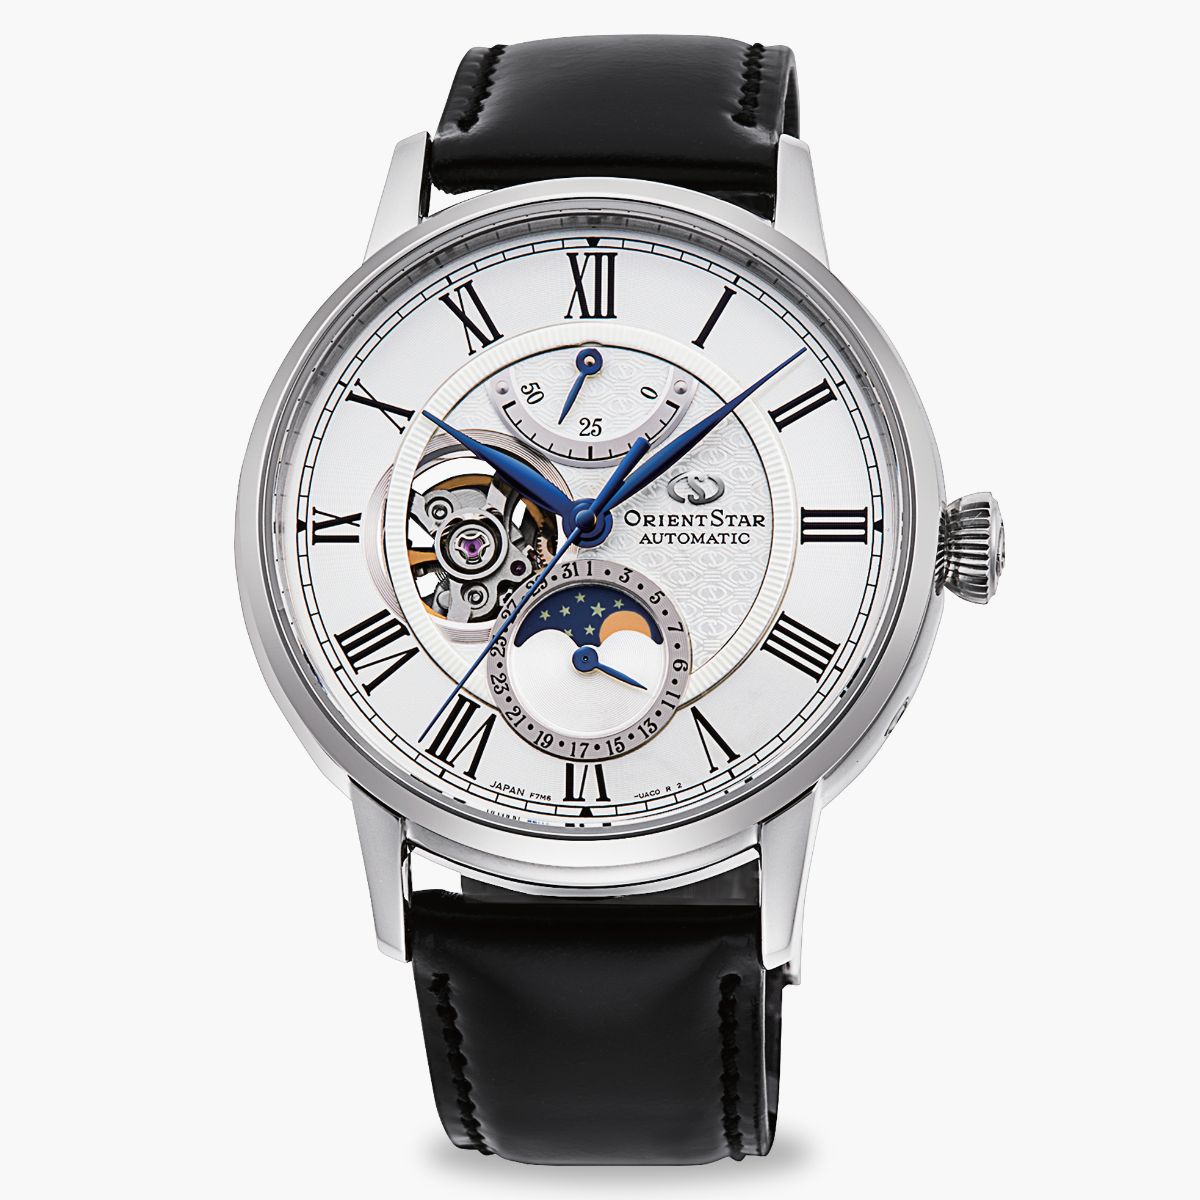 M45 F7 Mechanical Moon Phase RE-AY0106S